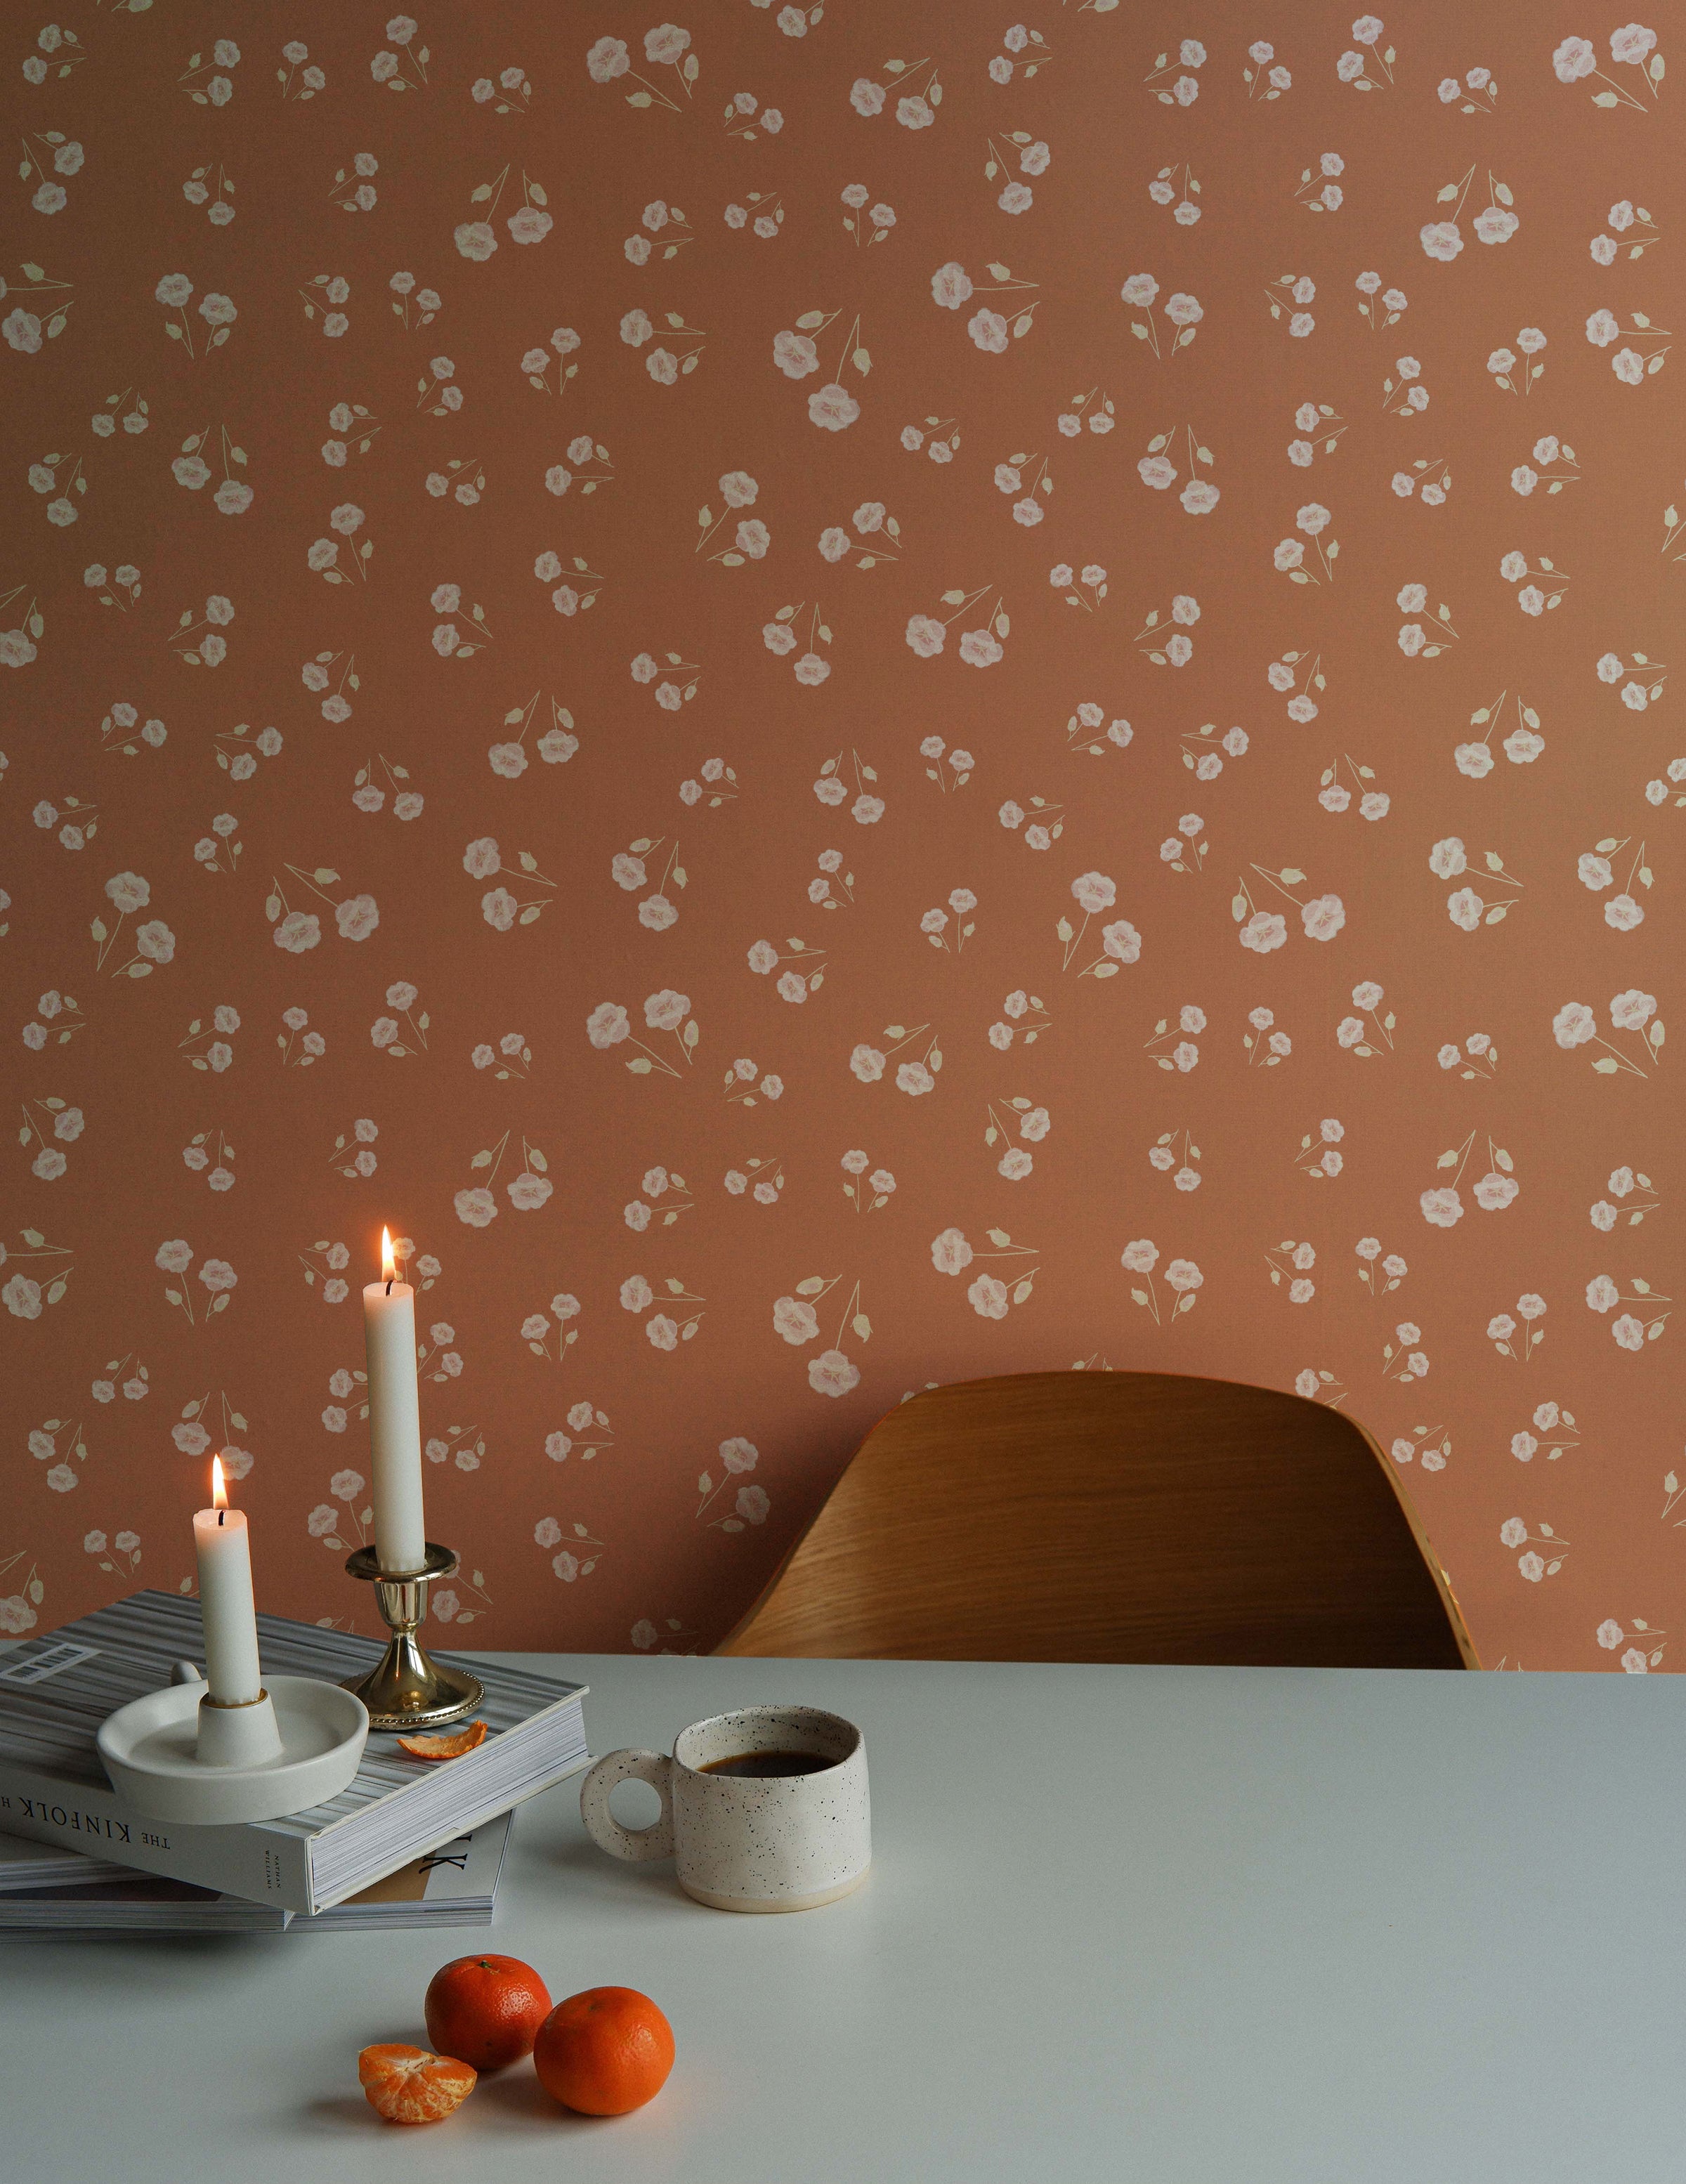 A stylish home office space enhanced by the Sienna Floral Wallpaper. The wallpaper adds a touch of sophistication with its floral pattern, creating an inviting atmosphere for work or relaxation.